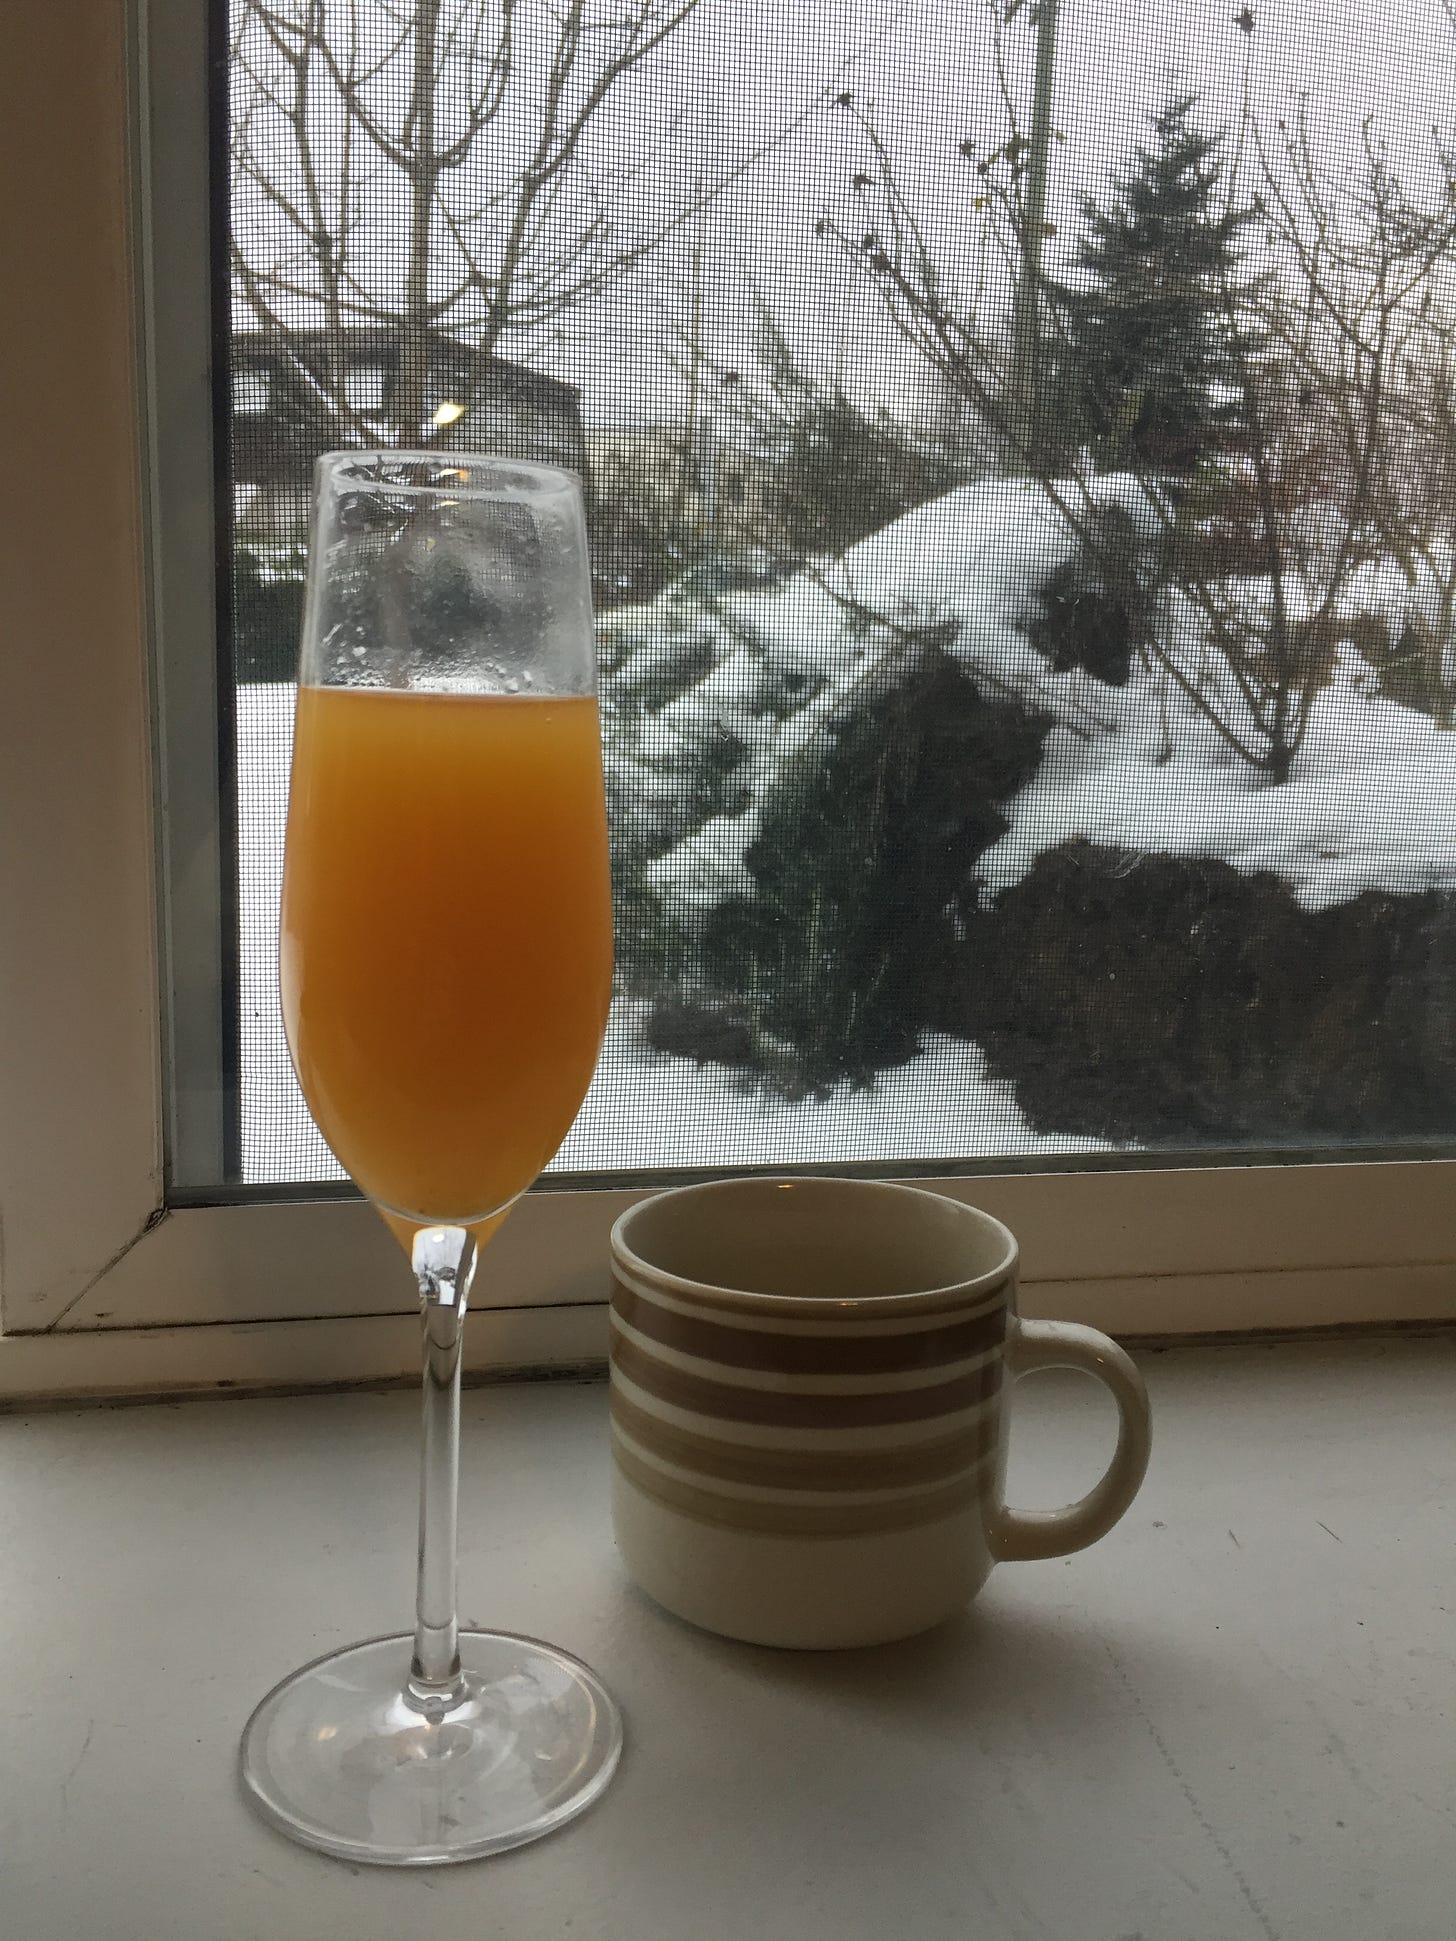 in front of a window showing a snowy yard, a mimosa in a champagne flute and a cup of coffee in a striped brown and beige mug sit on the windowsill.